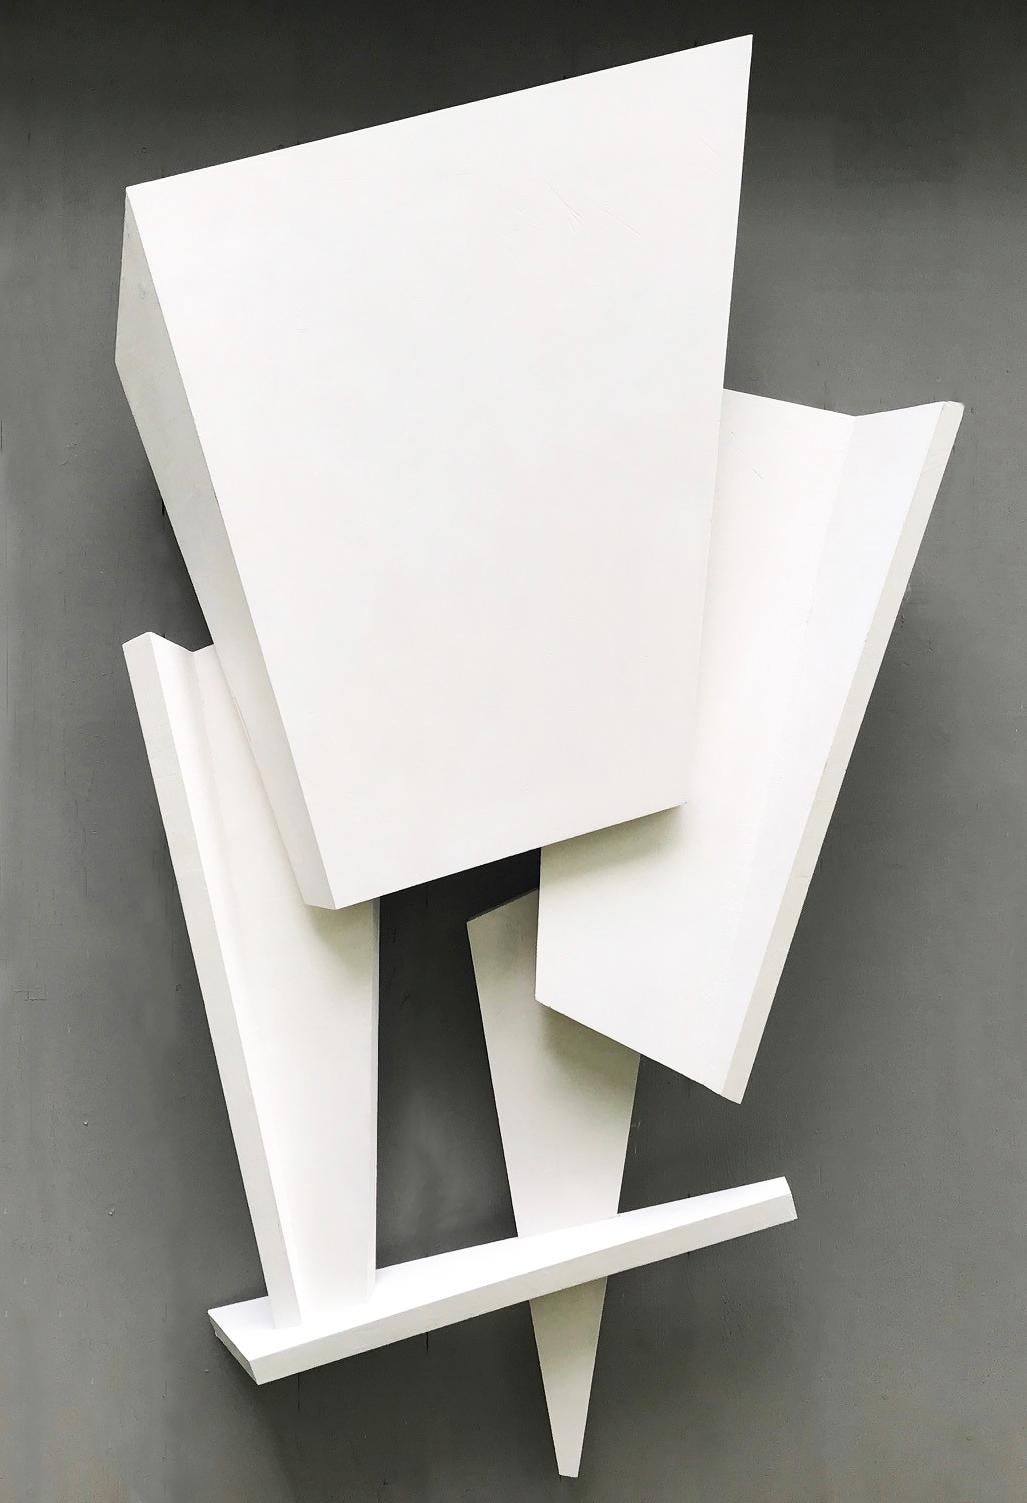 Closing Gate (New Brutalism Minimalist Abstract Wall Sculpture in Bright White)